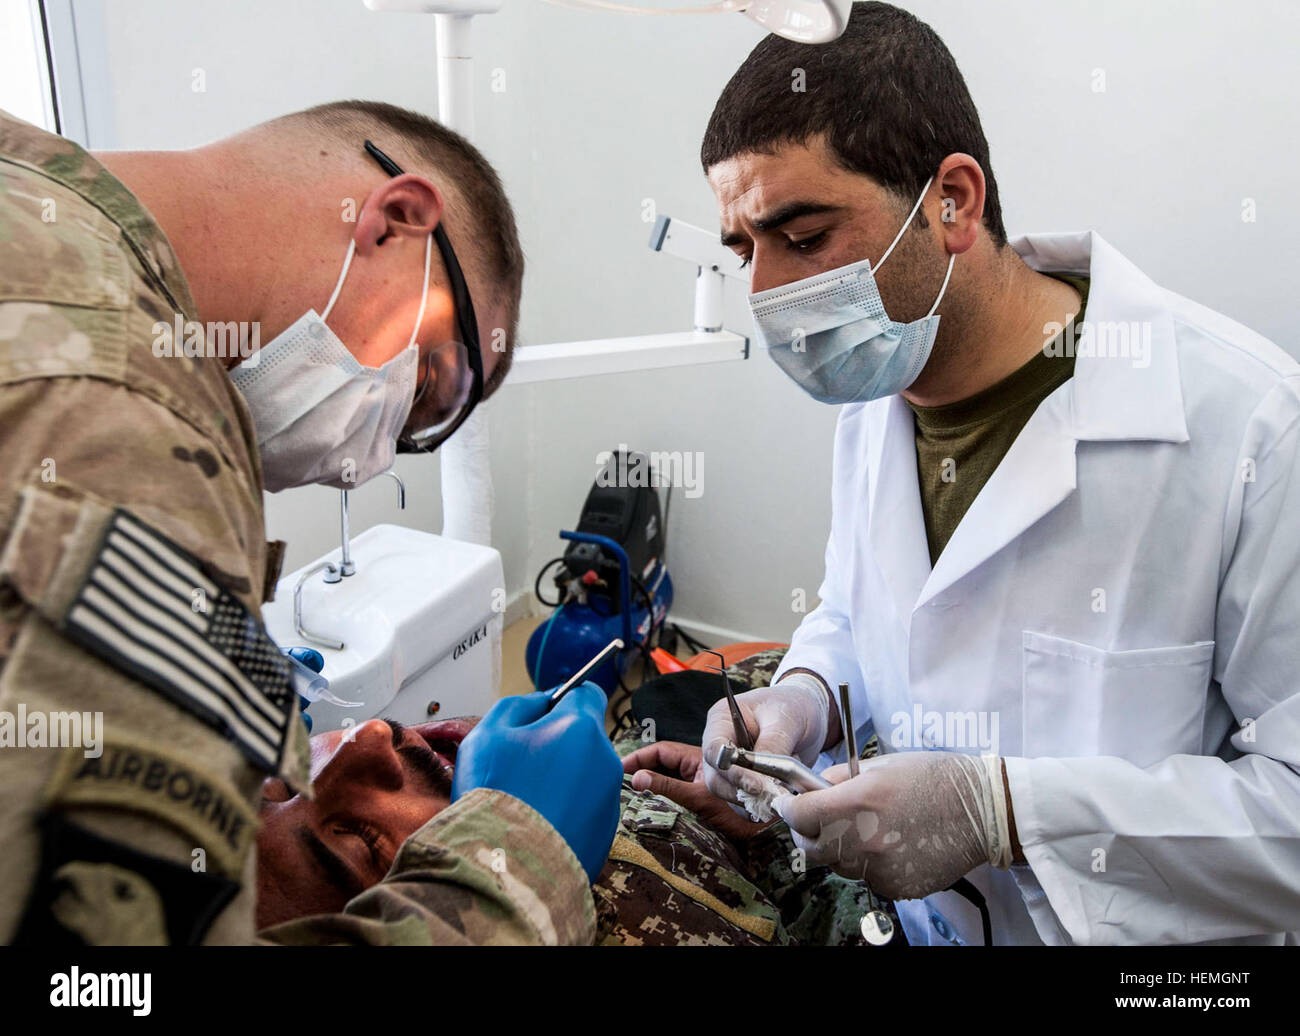 U.S. Army Sgt. Brian Kavanagh, a radiology specialist with Company C, 626th Brigade Support Battalion, 3rd Brigade Combat Team, 101st Airborne Division (Air Assault), inspects a tooth that is in need of extraction, with Afghan National Army (ANA) Dentist Capt. Mirwais Hussaini, 1st Brigade, 203rd Corps, at Camp Pars in Khowst province, Afghanistan, April 14, 2013. The procedure was part of an ongoing partnership between ANA and U.S. Army medical personnel for ANA troops.  (U.S. Army National Guard photo by Sgt. Joshua S. Edwards/Released) Trip to the dentist, How partnership builds a healthier Stock Photo